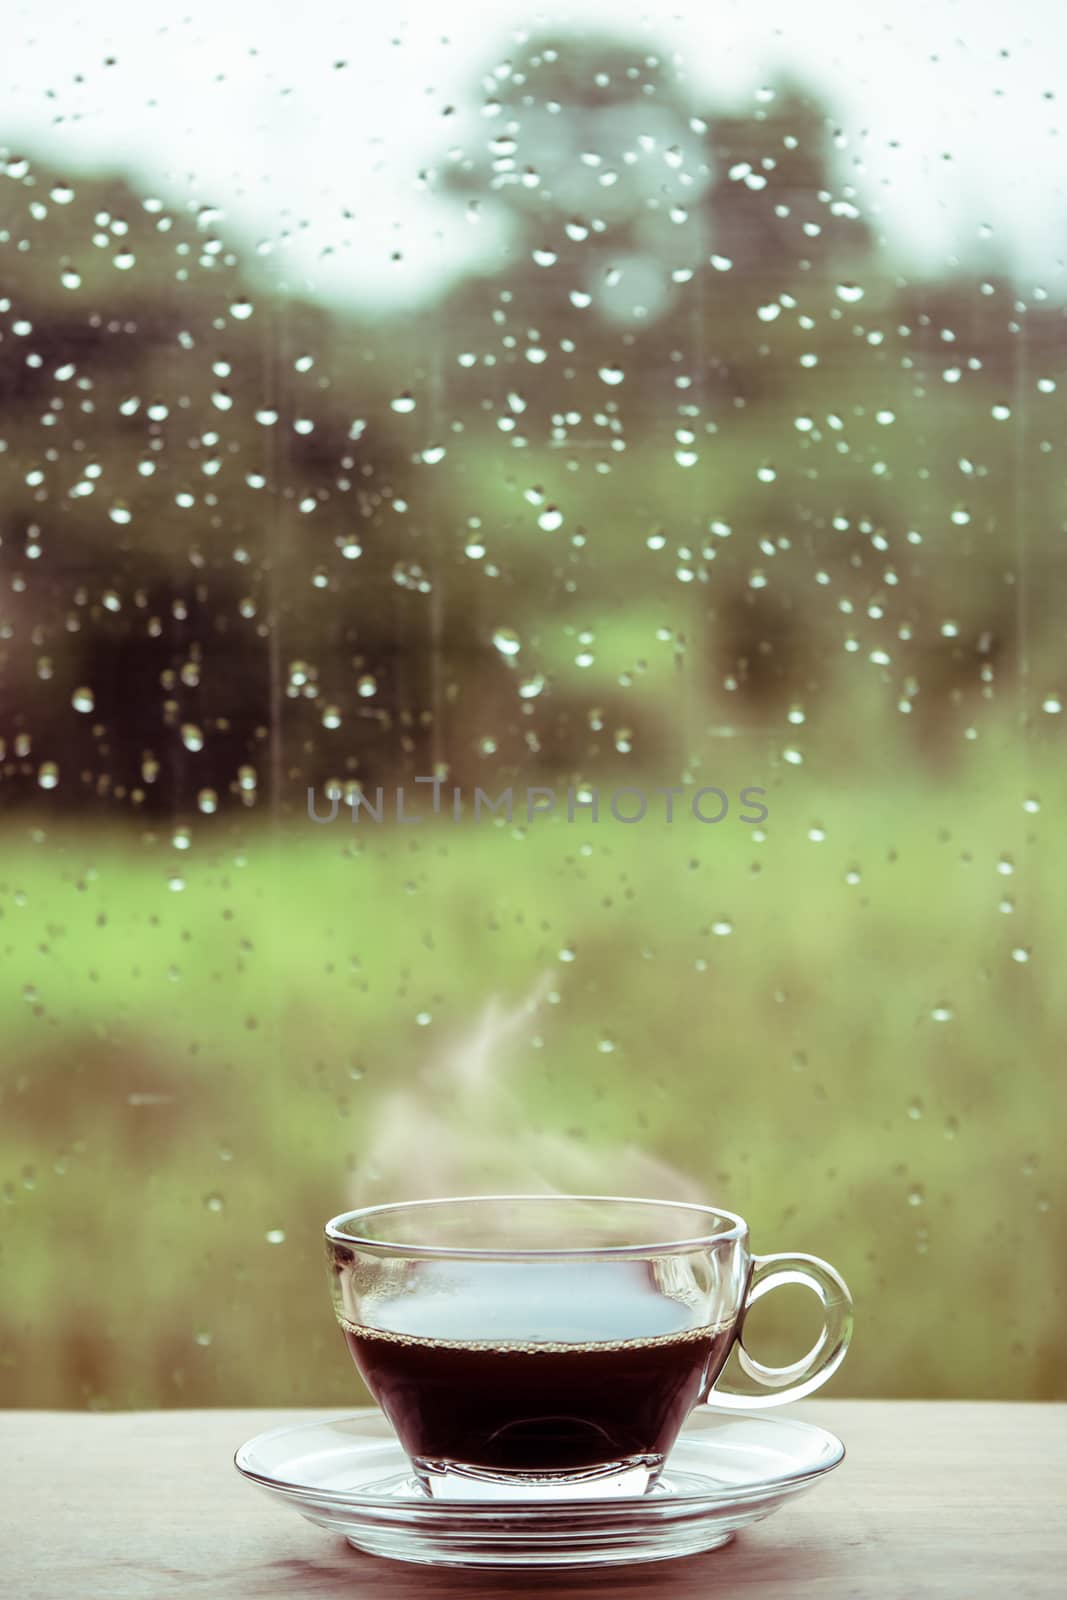 Cup of coffee on the table inside the window, coffee break in the morning with rainy day, relaxing and refreshing concepts.